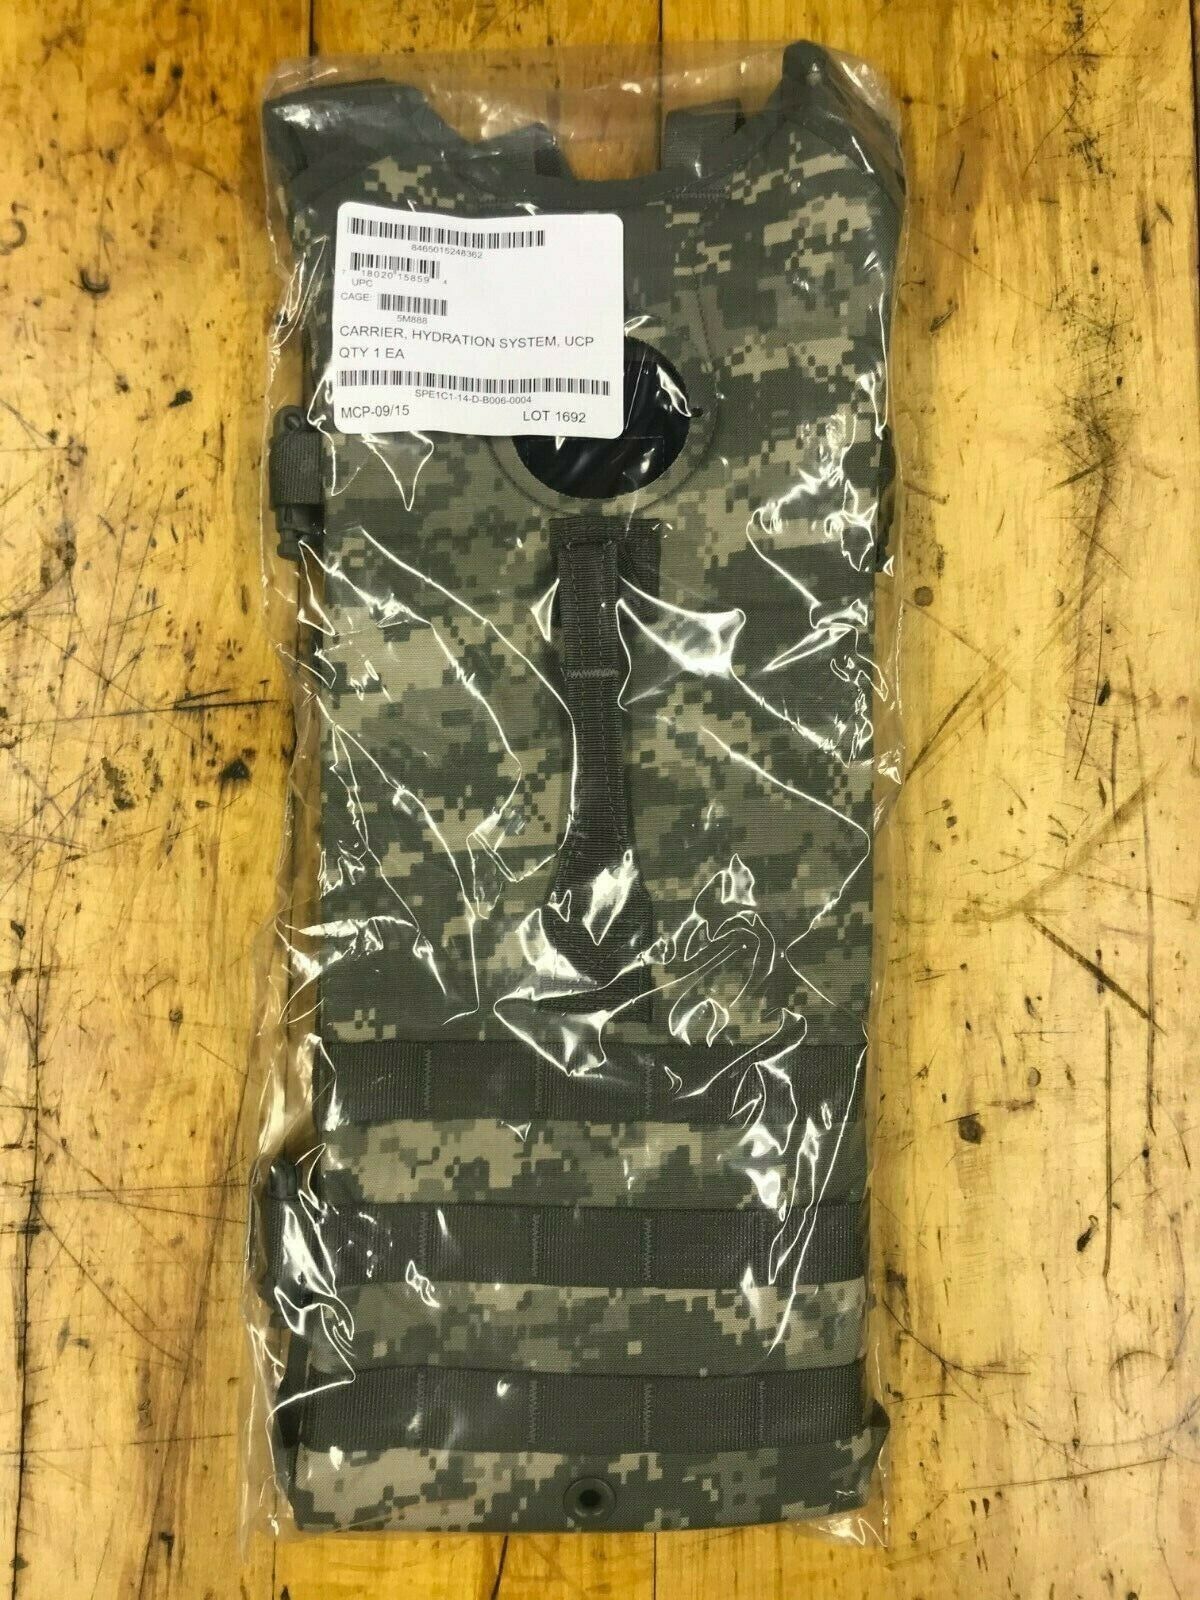 NEW US Army Molle II UCP Camo Hydration System Carrier, Camelback Hydromax